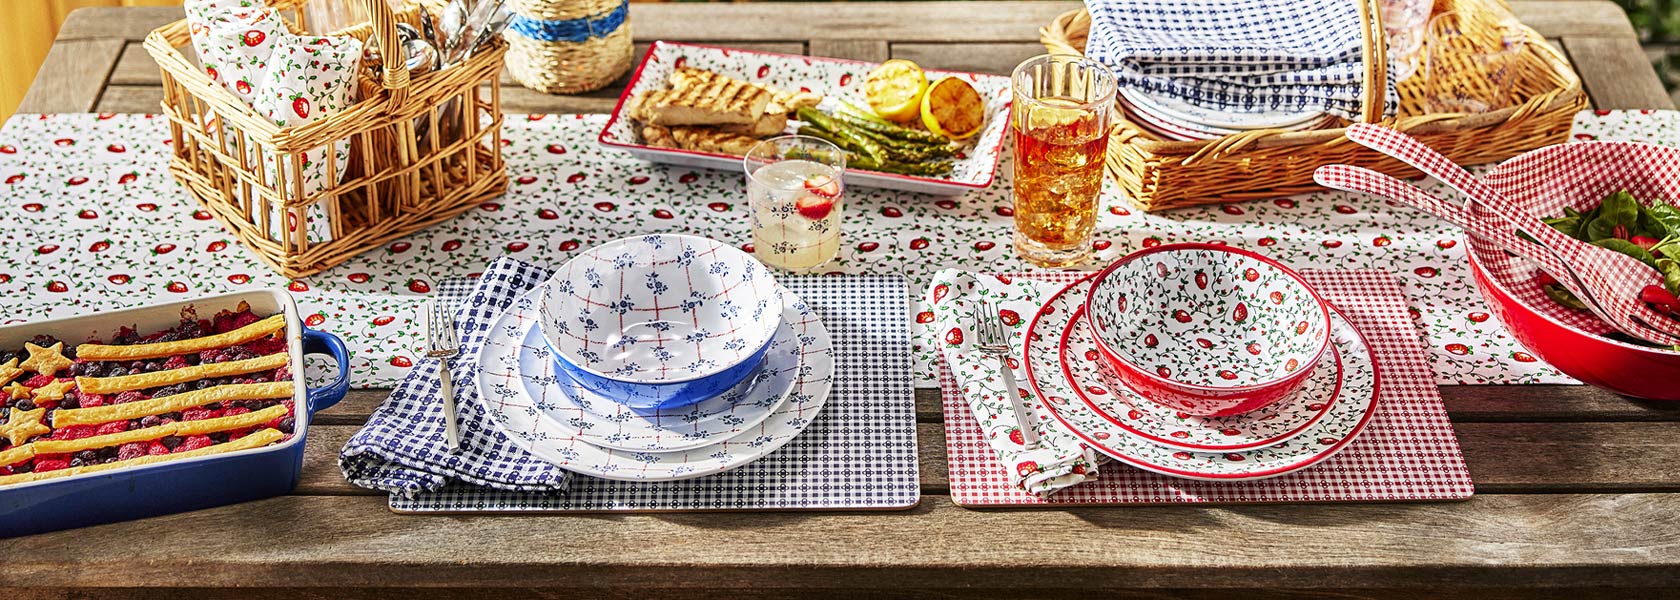 Americana outdoor dinnerware in red and white strawberry design or blue and white floral